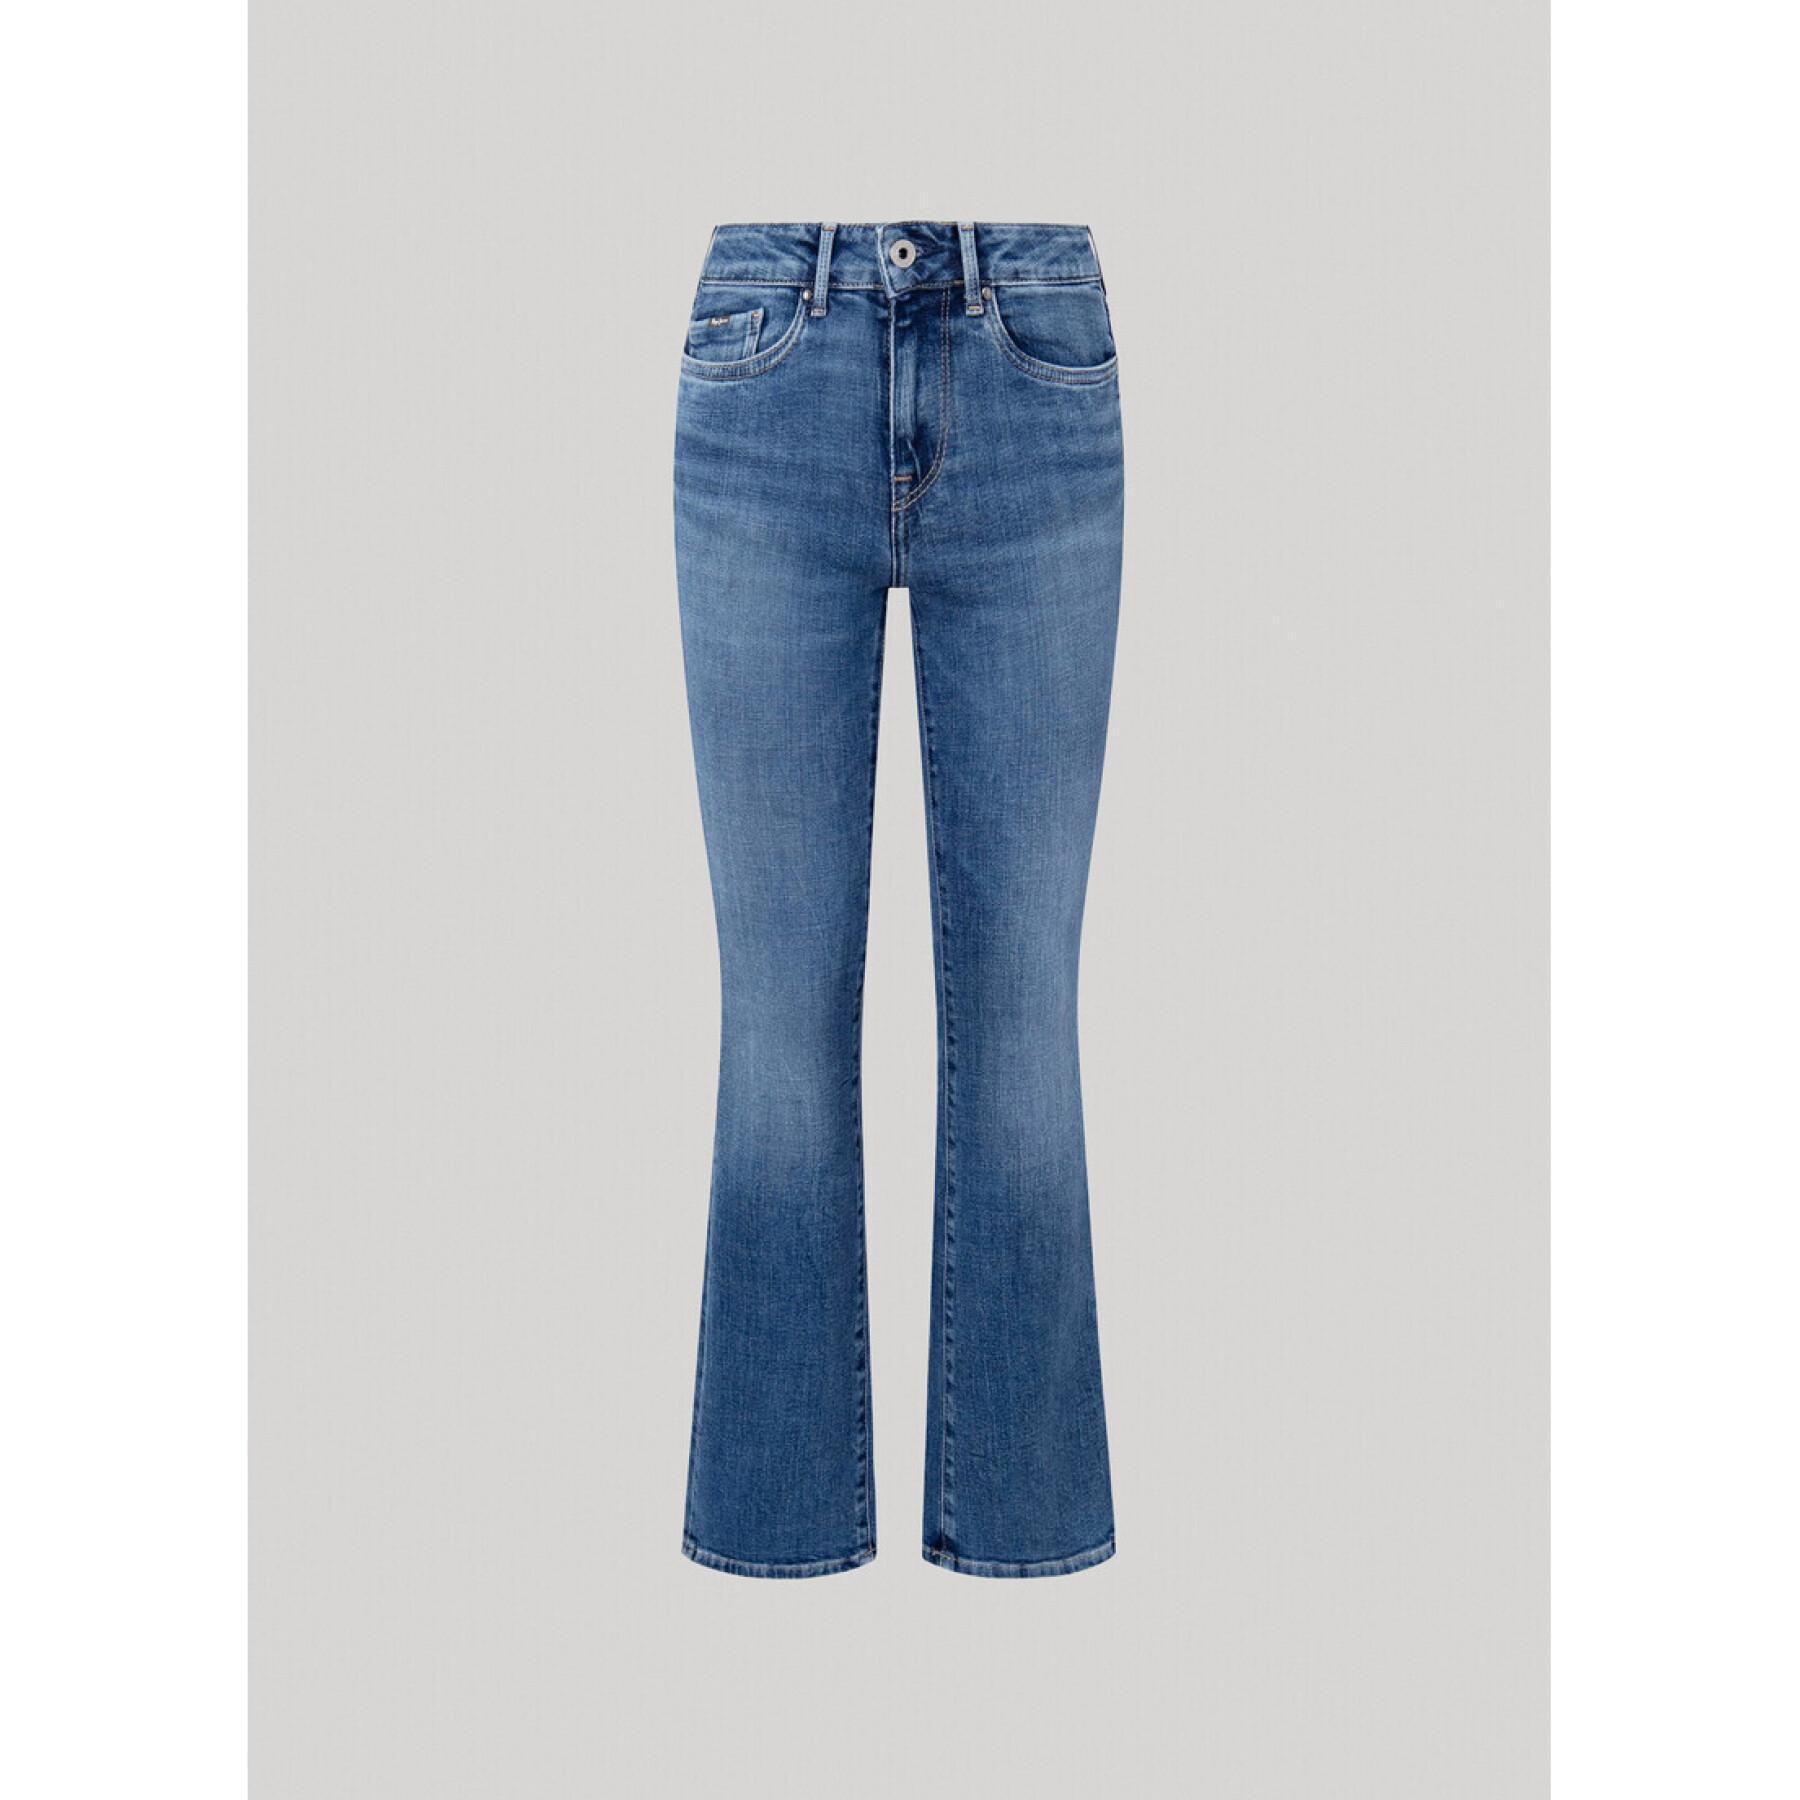 Women's jeans Pepe Jeans Piccadilly